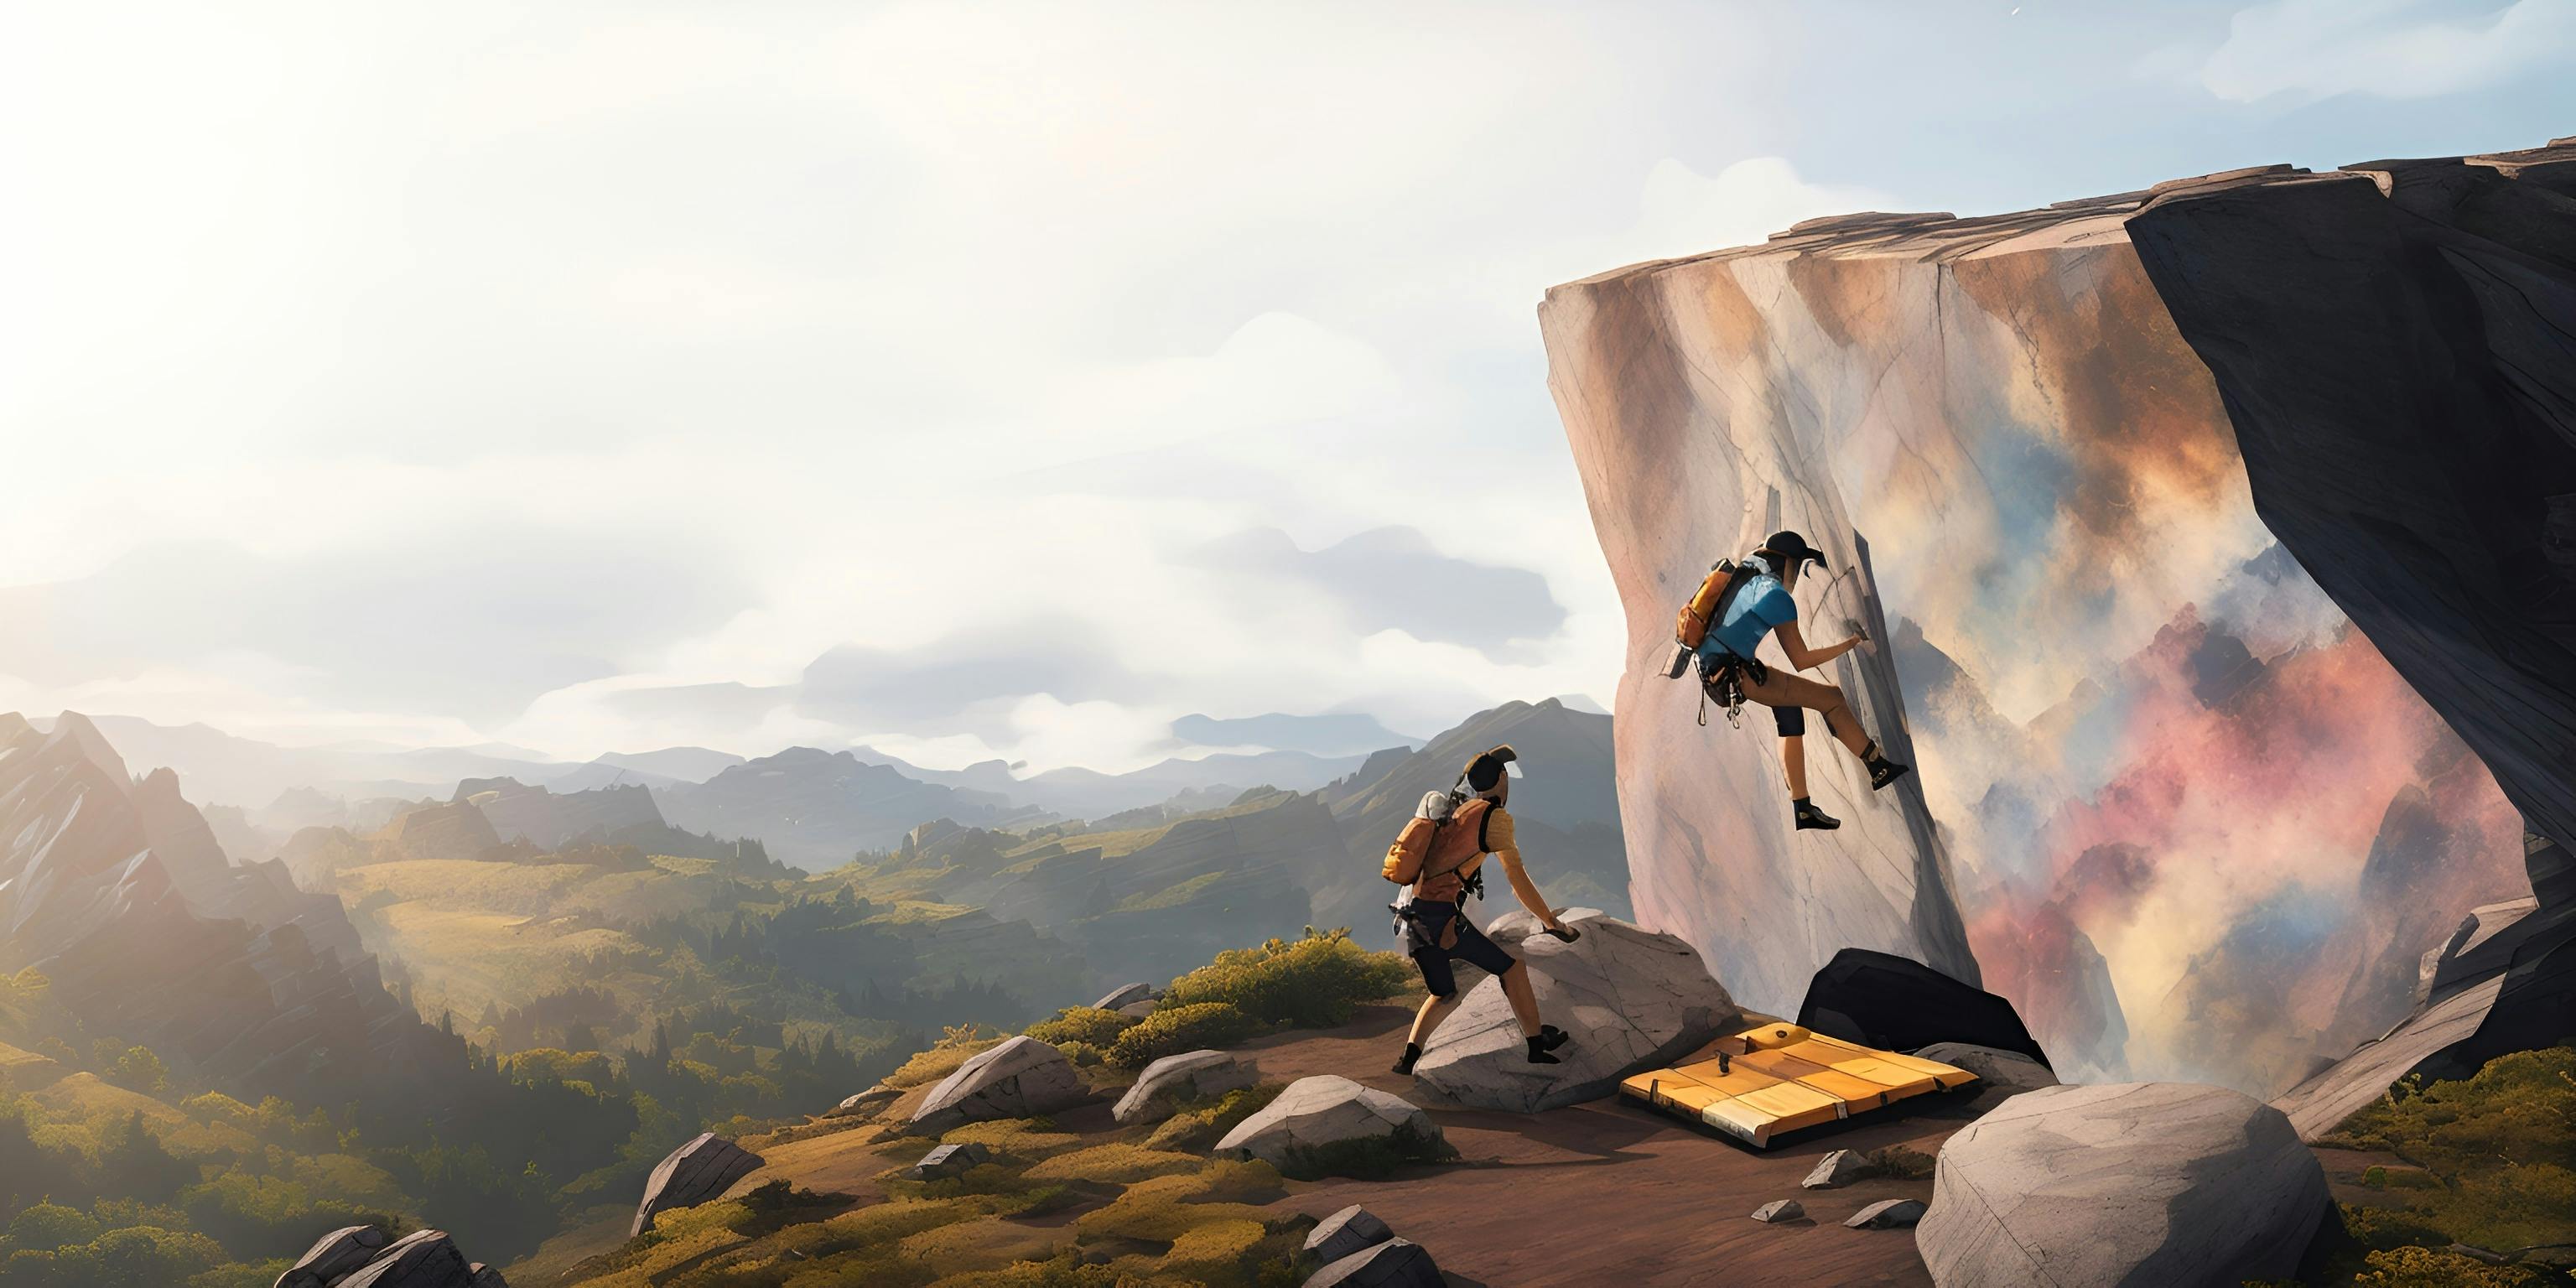 Outdoor Bouldering cover image